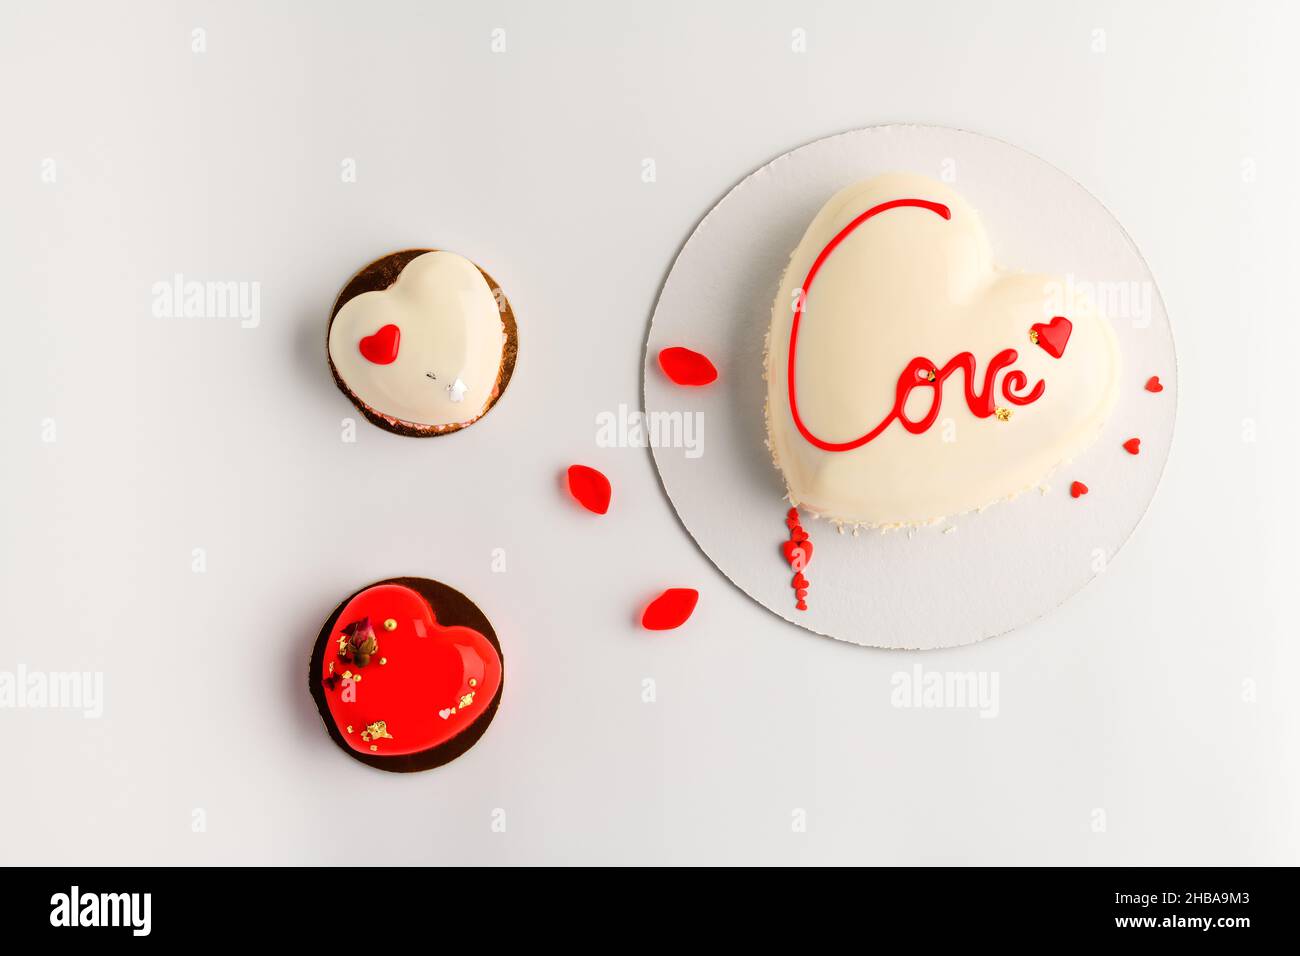 St. Valentine's Day background for bakery, confectionery.  White  mousse cake  and two little cakes in the shape of a heart  on a white background. Stock Photo